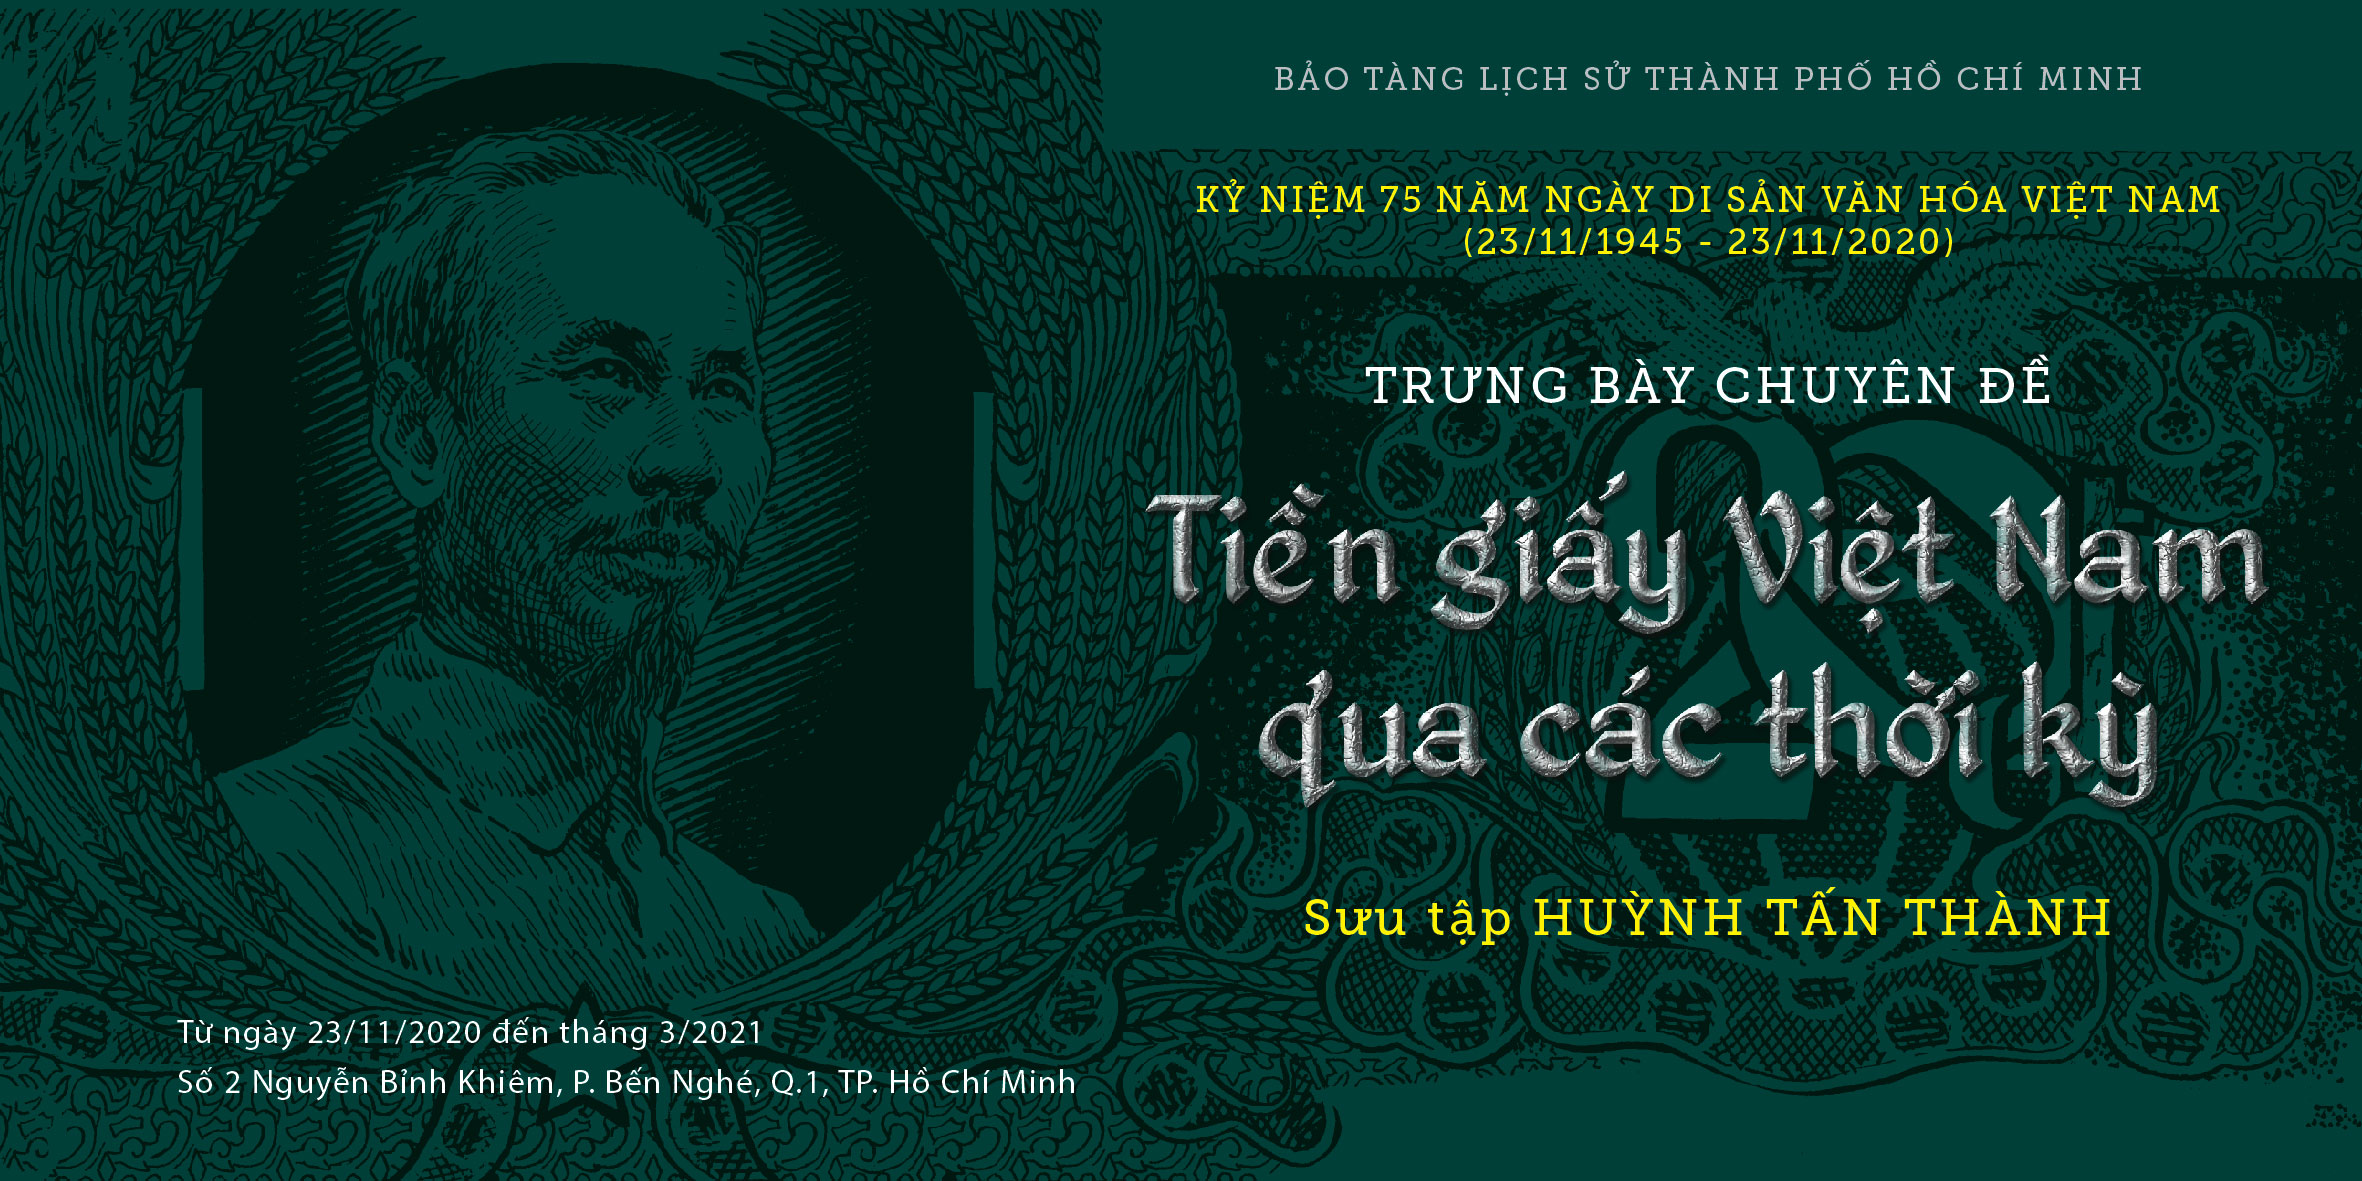 Vietnamese banknotes through the ages